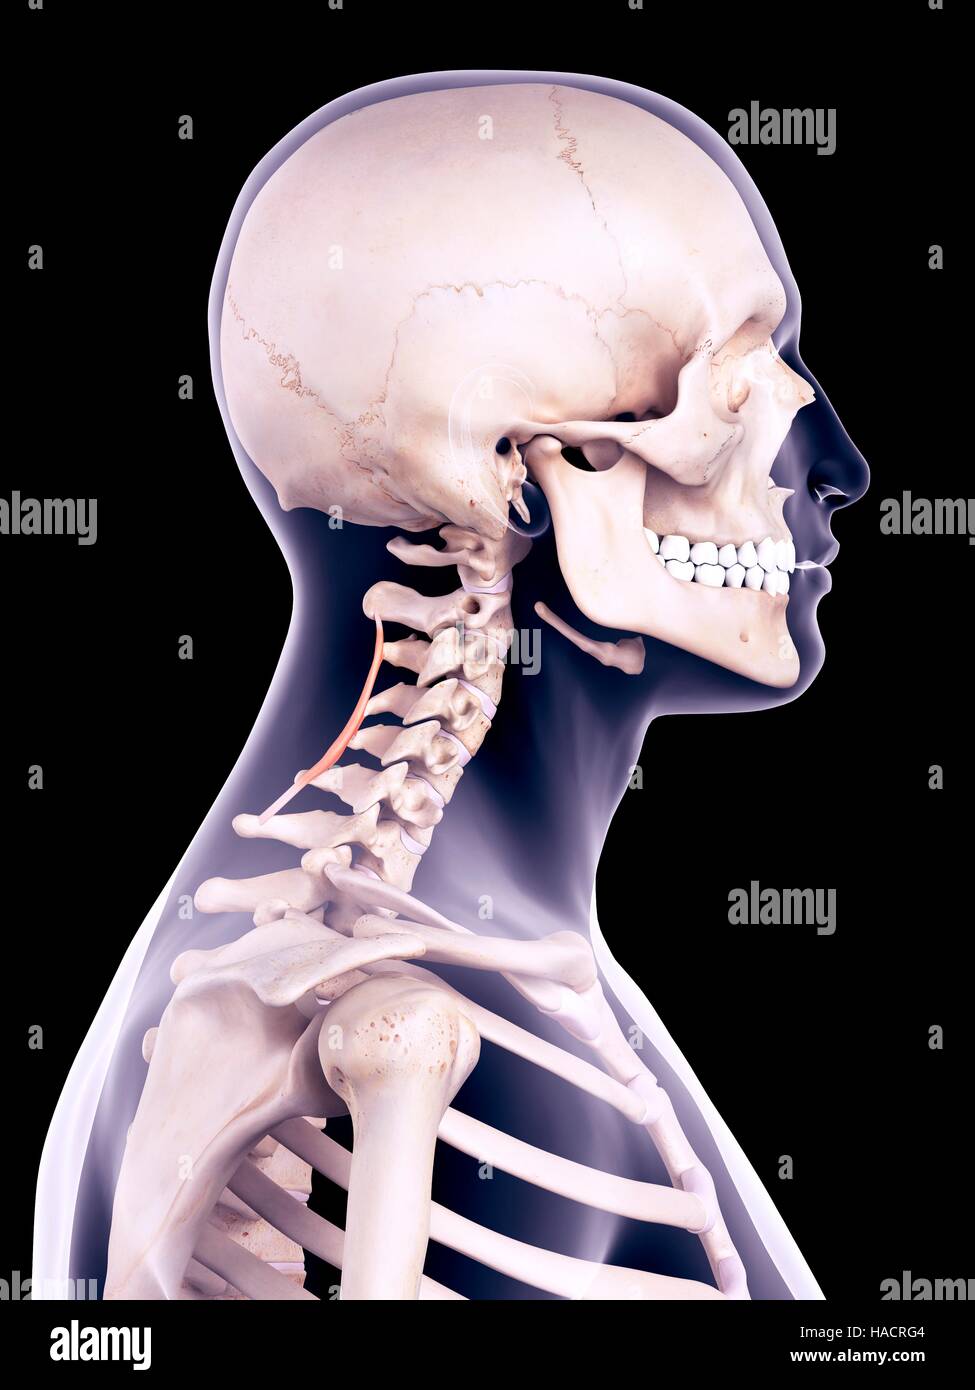 Illustration of the spinalis cervicis muscles. Stock Photo